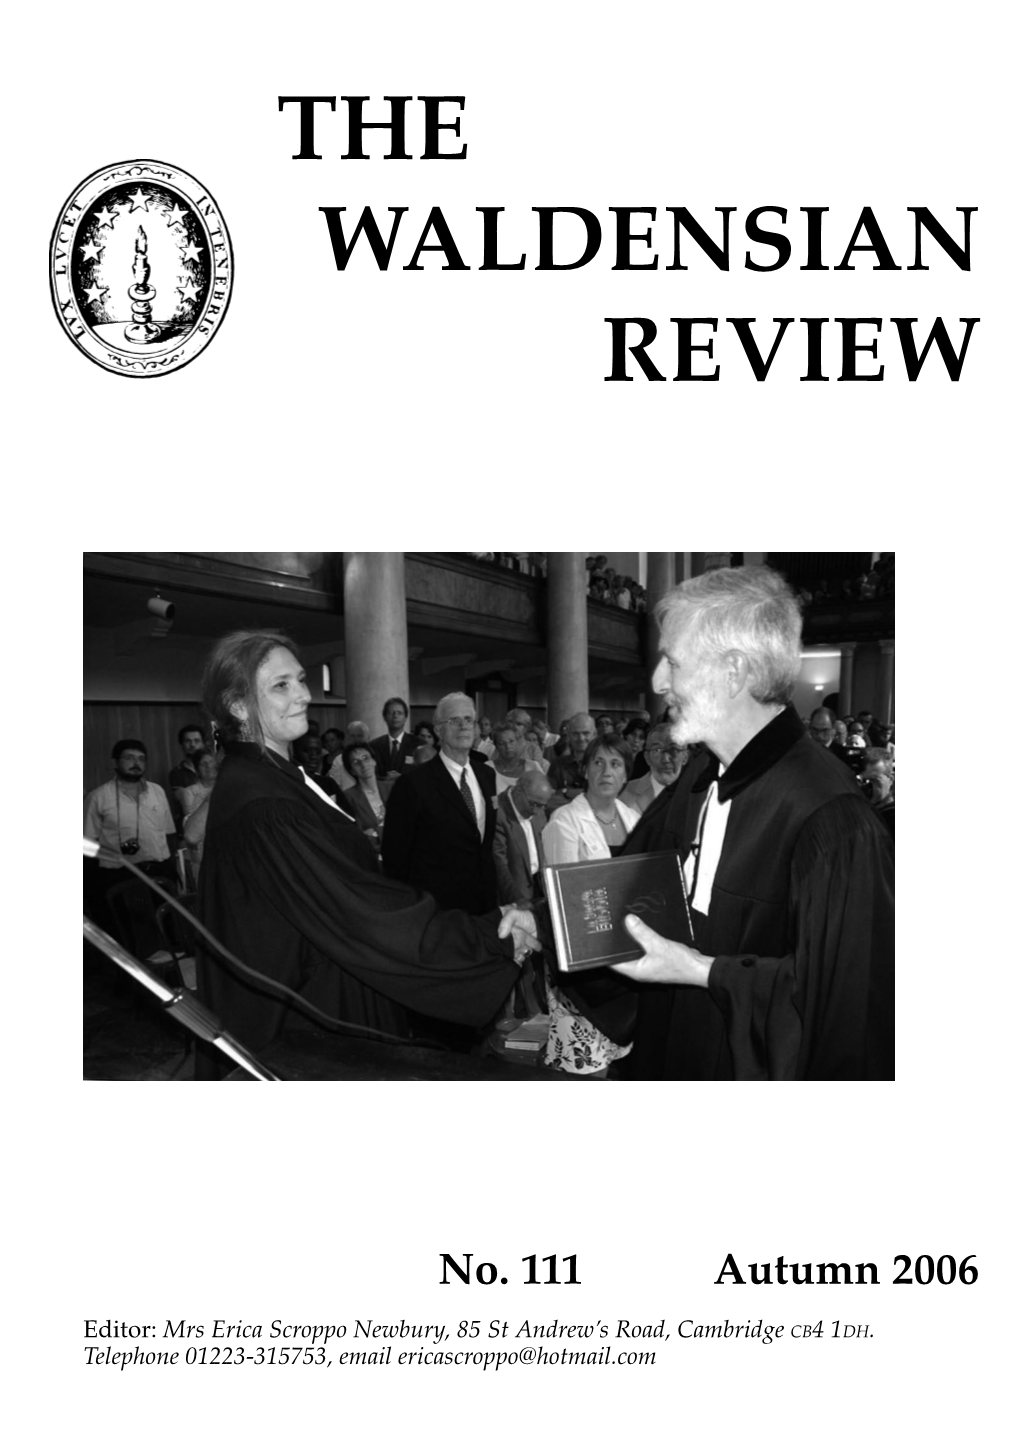 The Waldensian Review